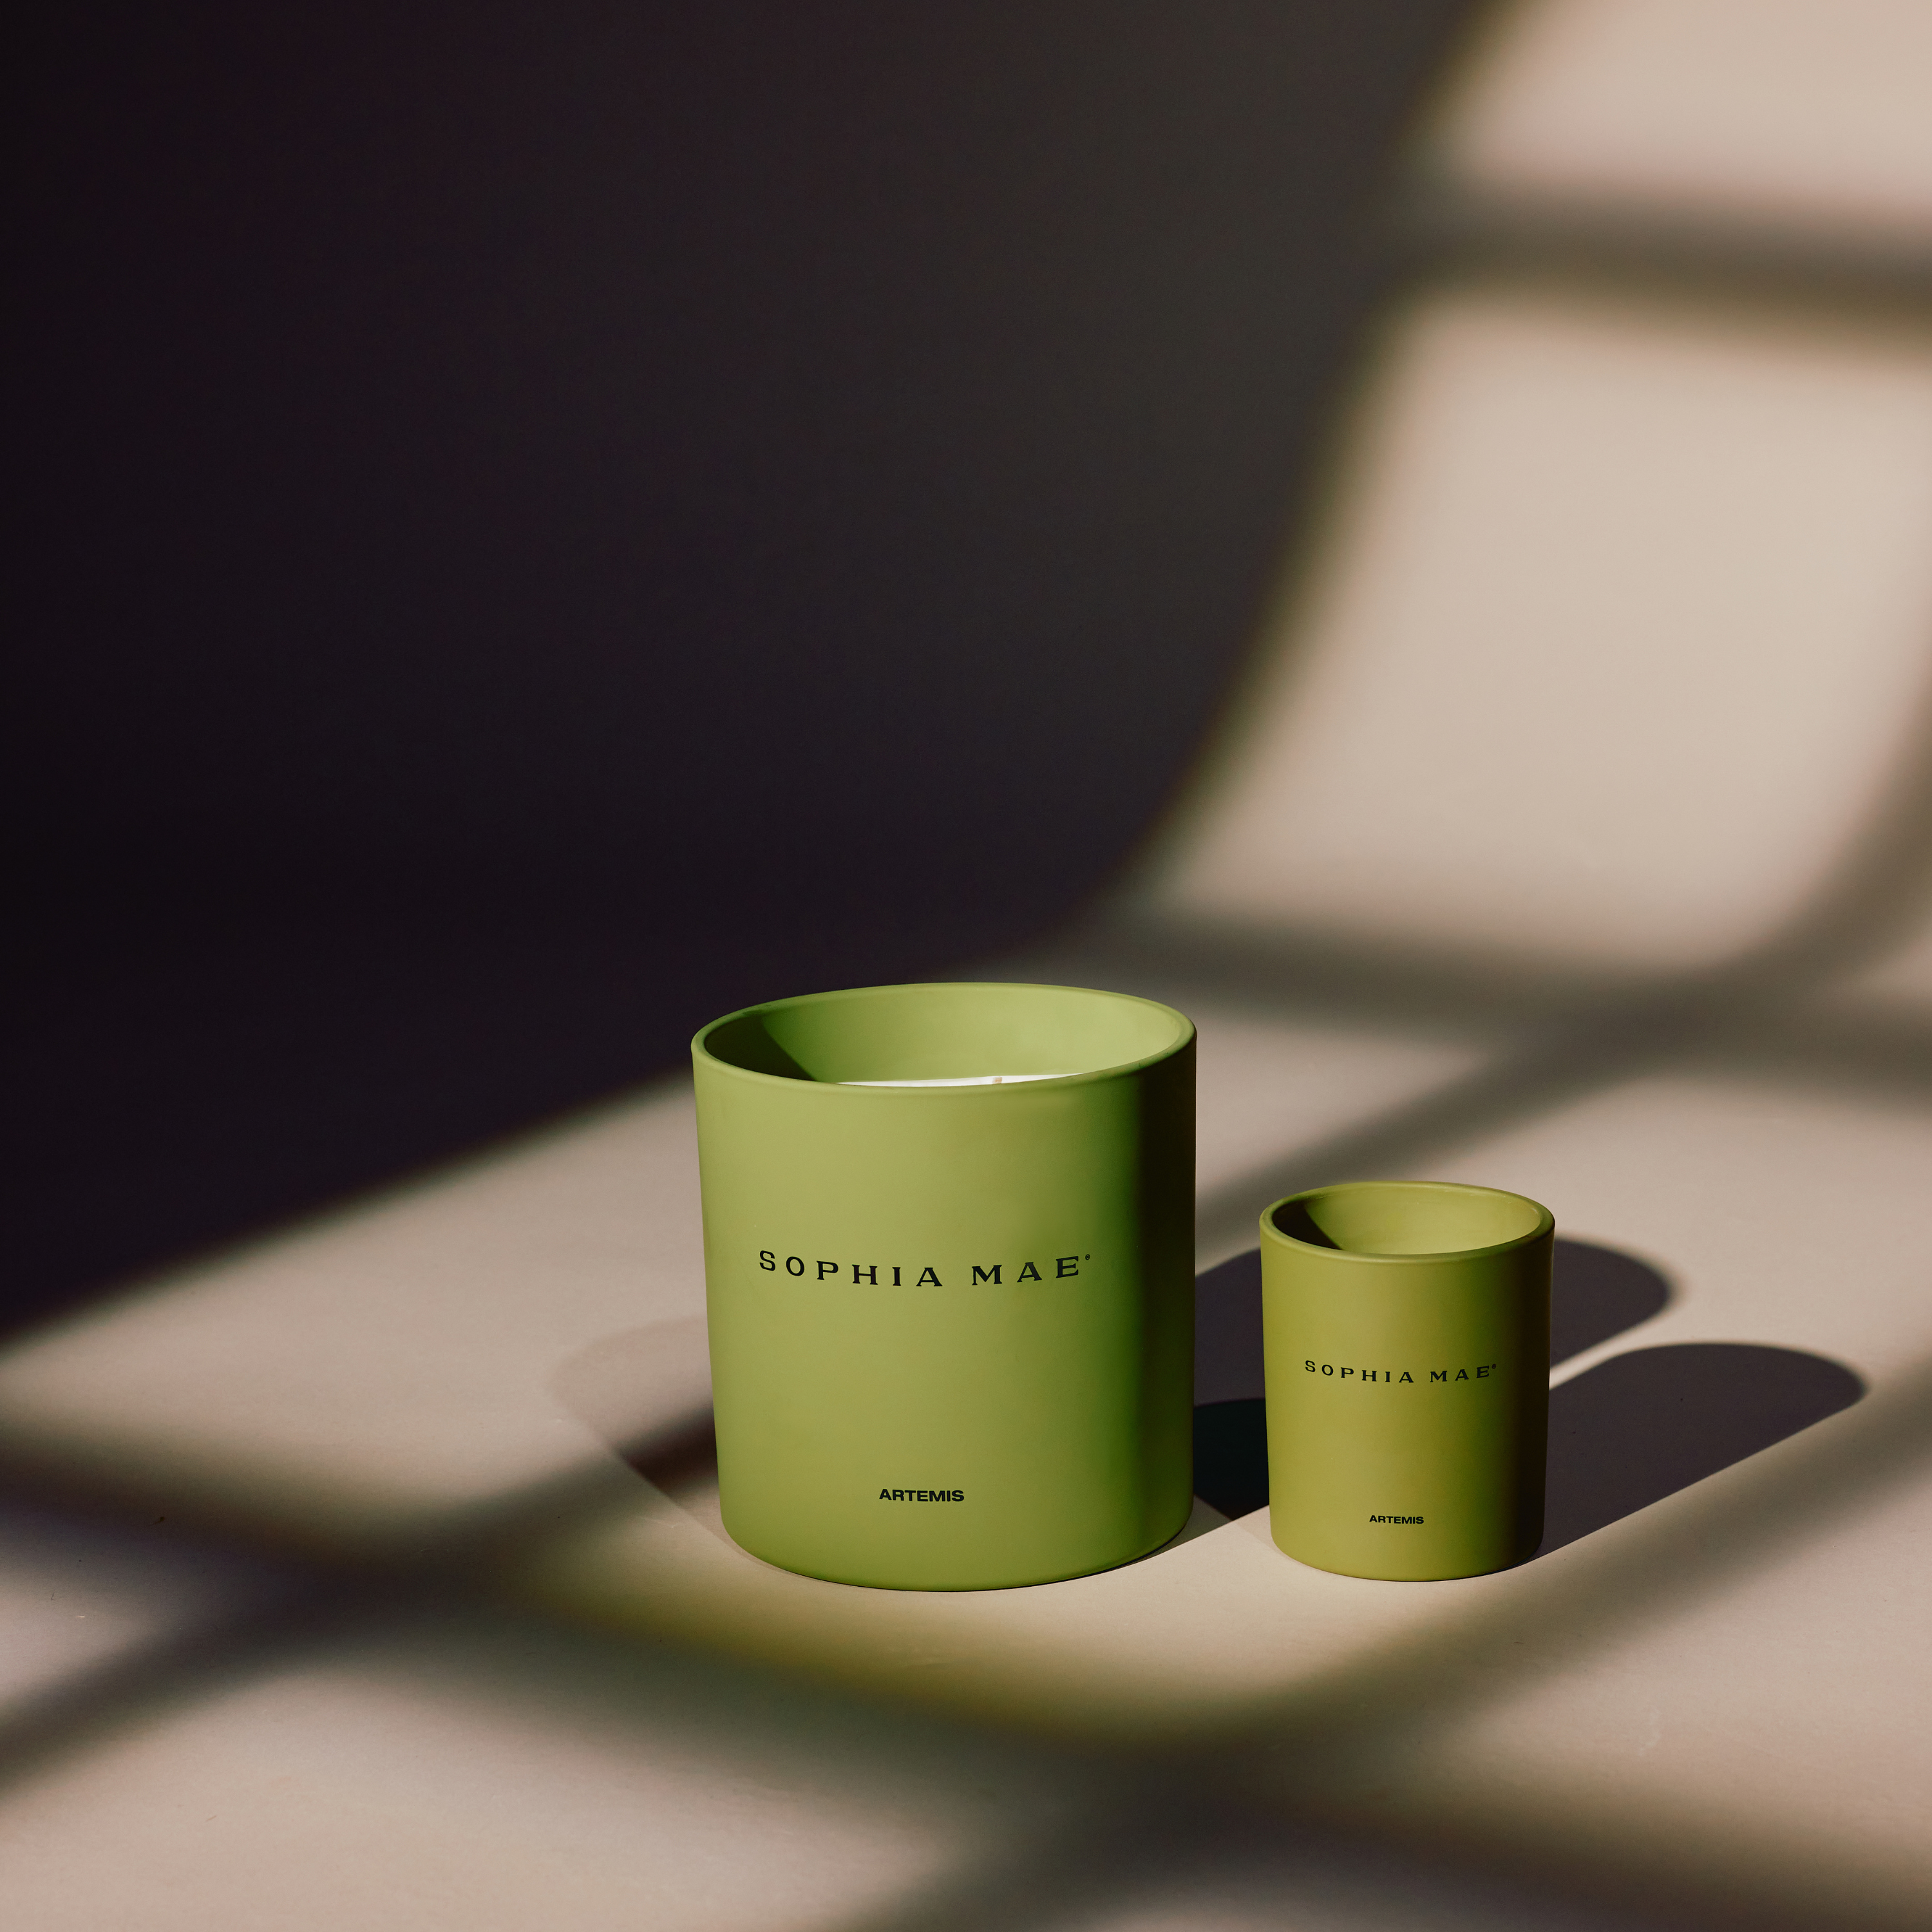 ARTEMIS SCENTED CANDLE MAXI | SOPHIA MAE by Monica Geuze